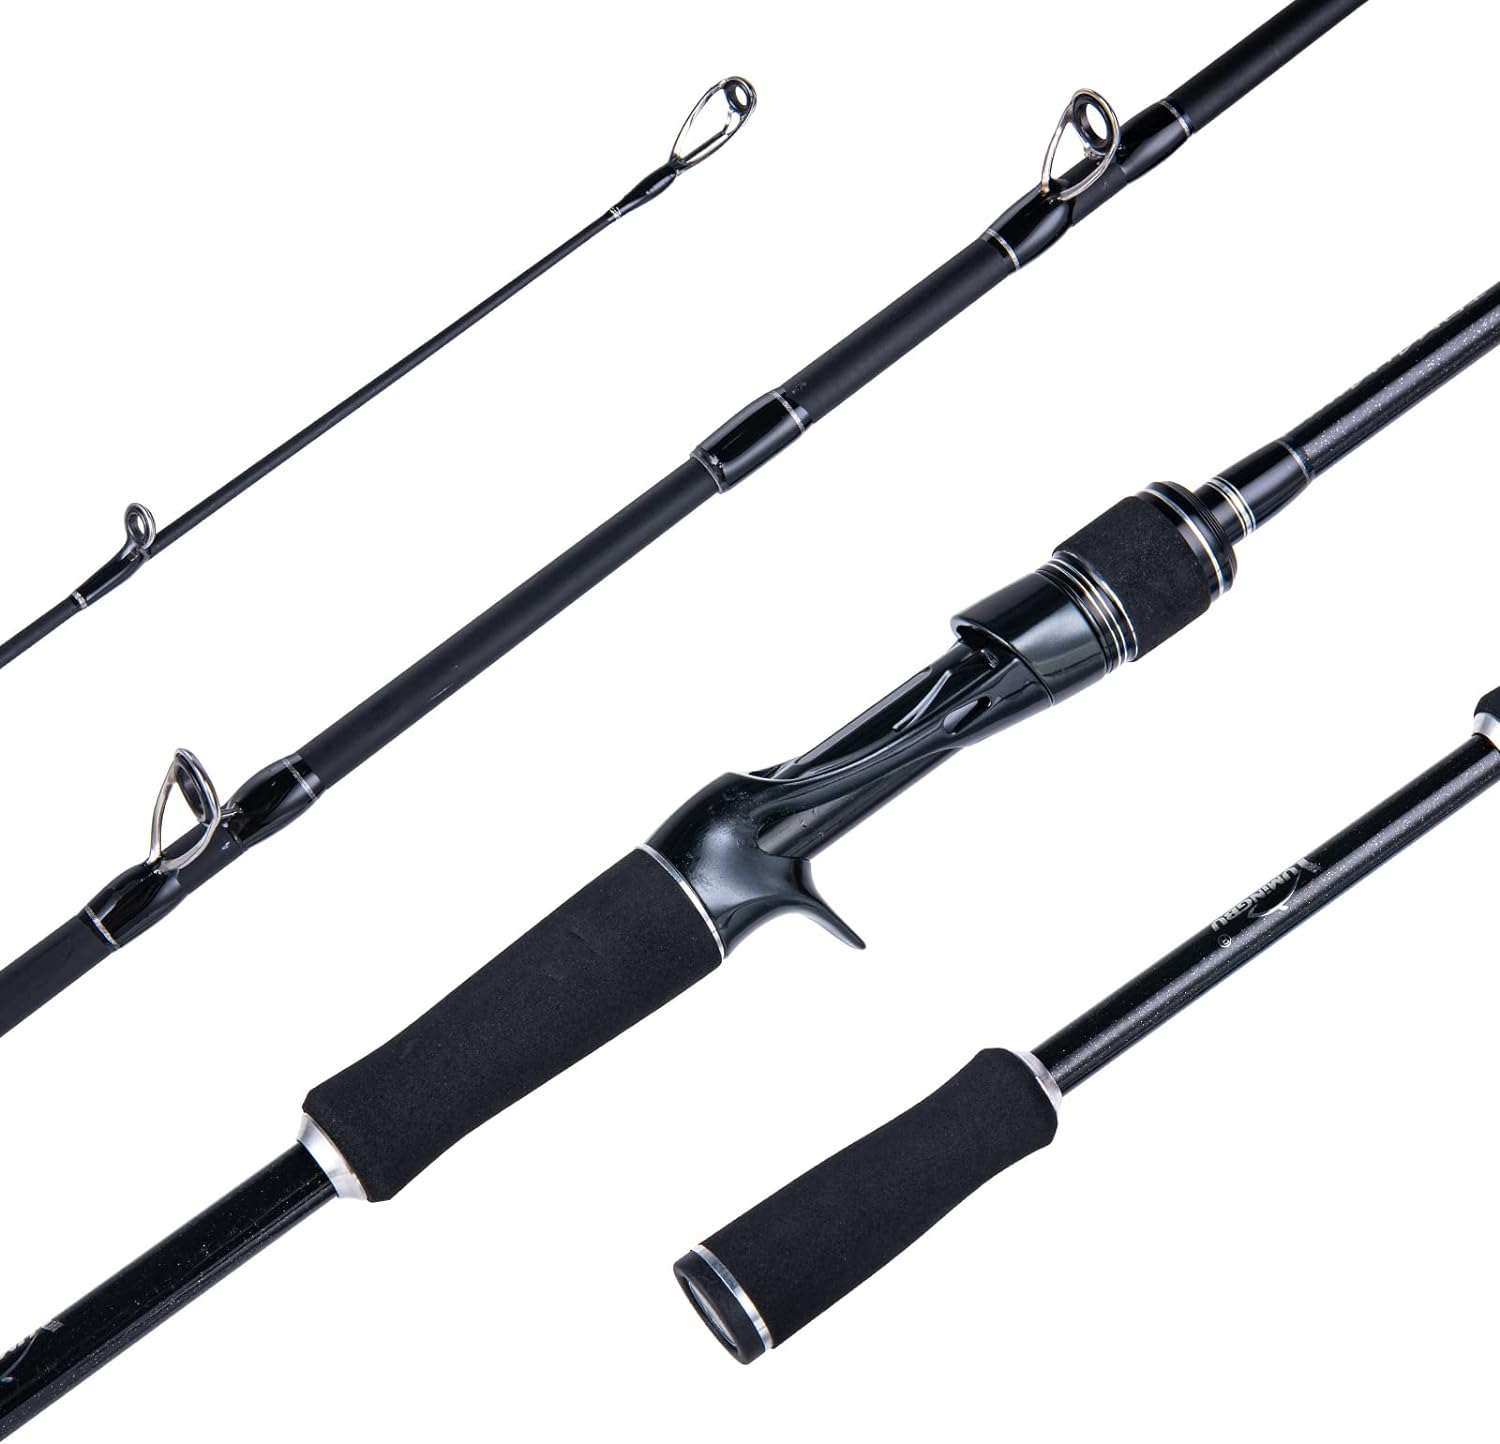 Goture Portable Travel Fishing Rod - 1 Piece/2 Piece/3 Piece Fishing Pole with Bag, Ultralight Telescopic Fishing Rod/Twin Tip Spinning and Casting Rod/Baitcaster Rod for Crappie Bass Trout Fishing